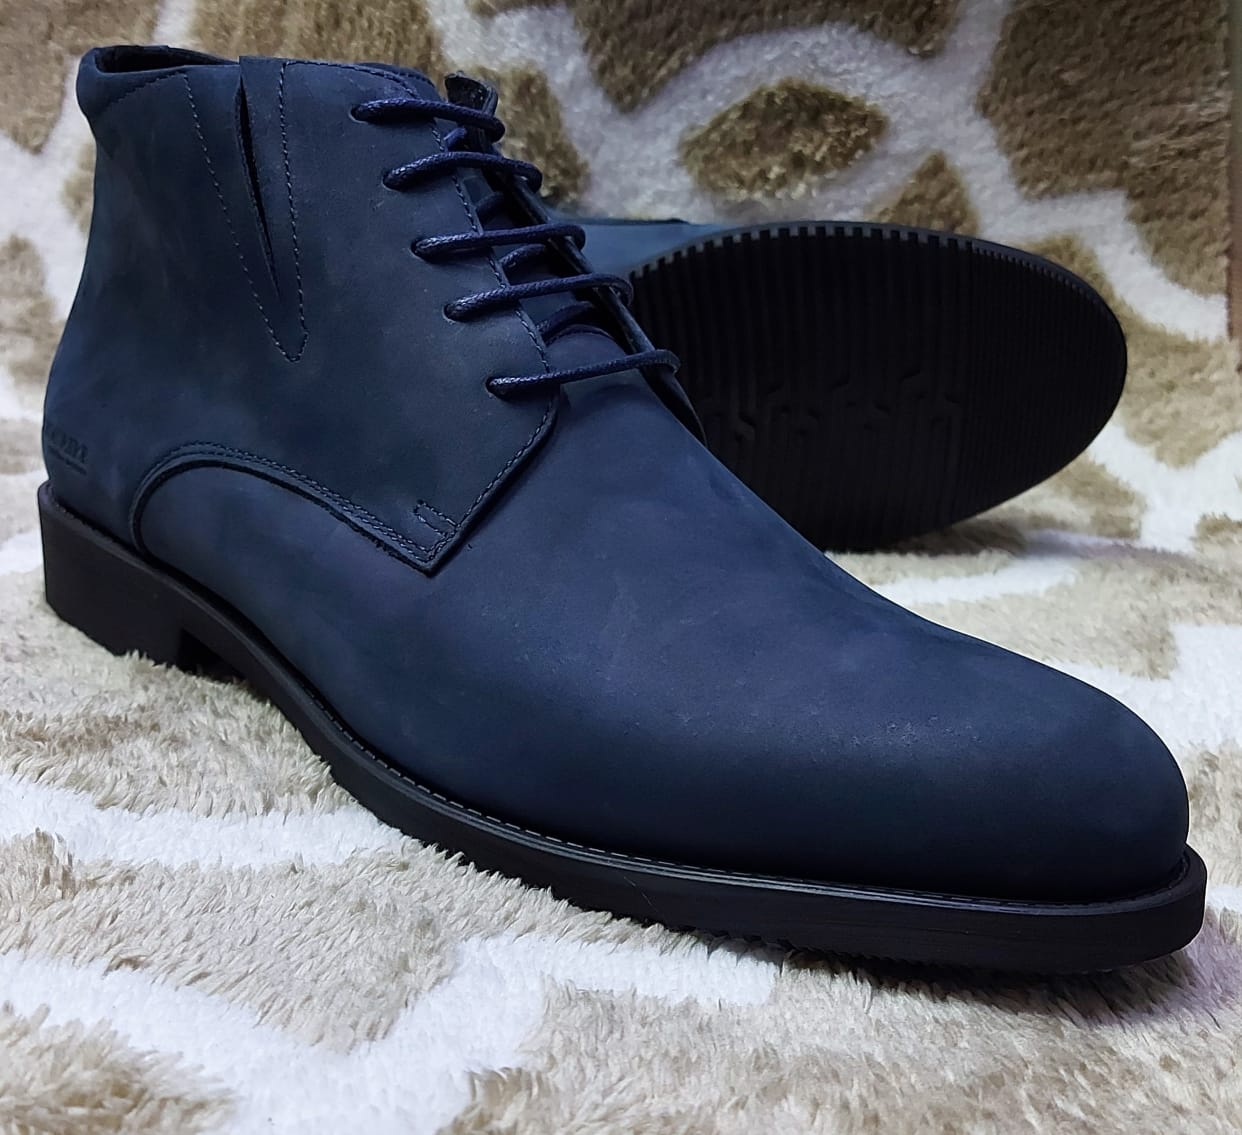 Stylish boots for men | Sokofy